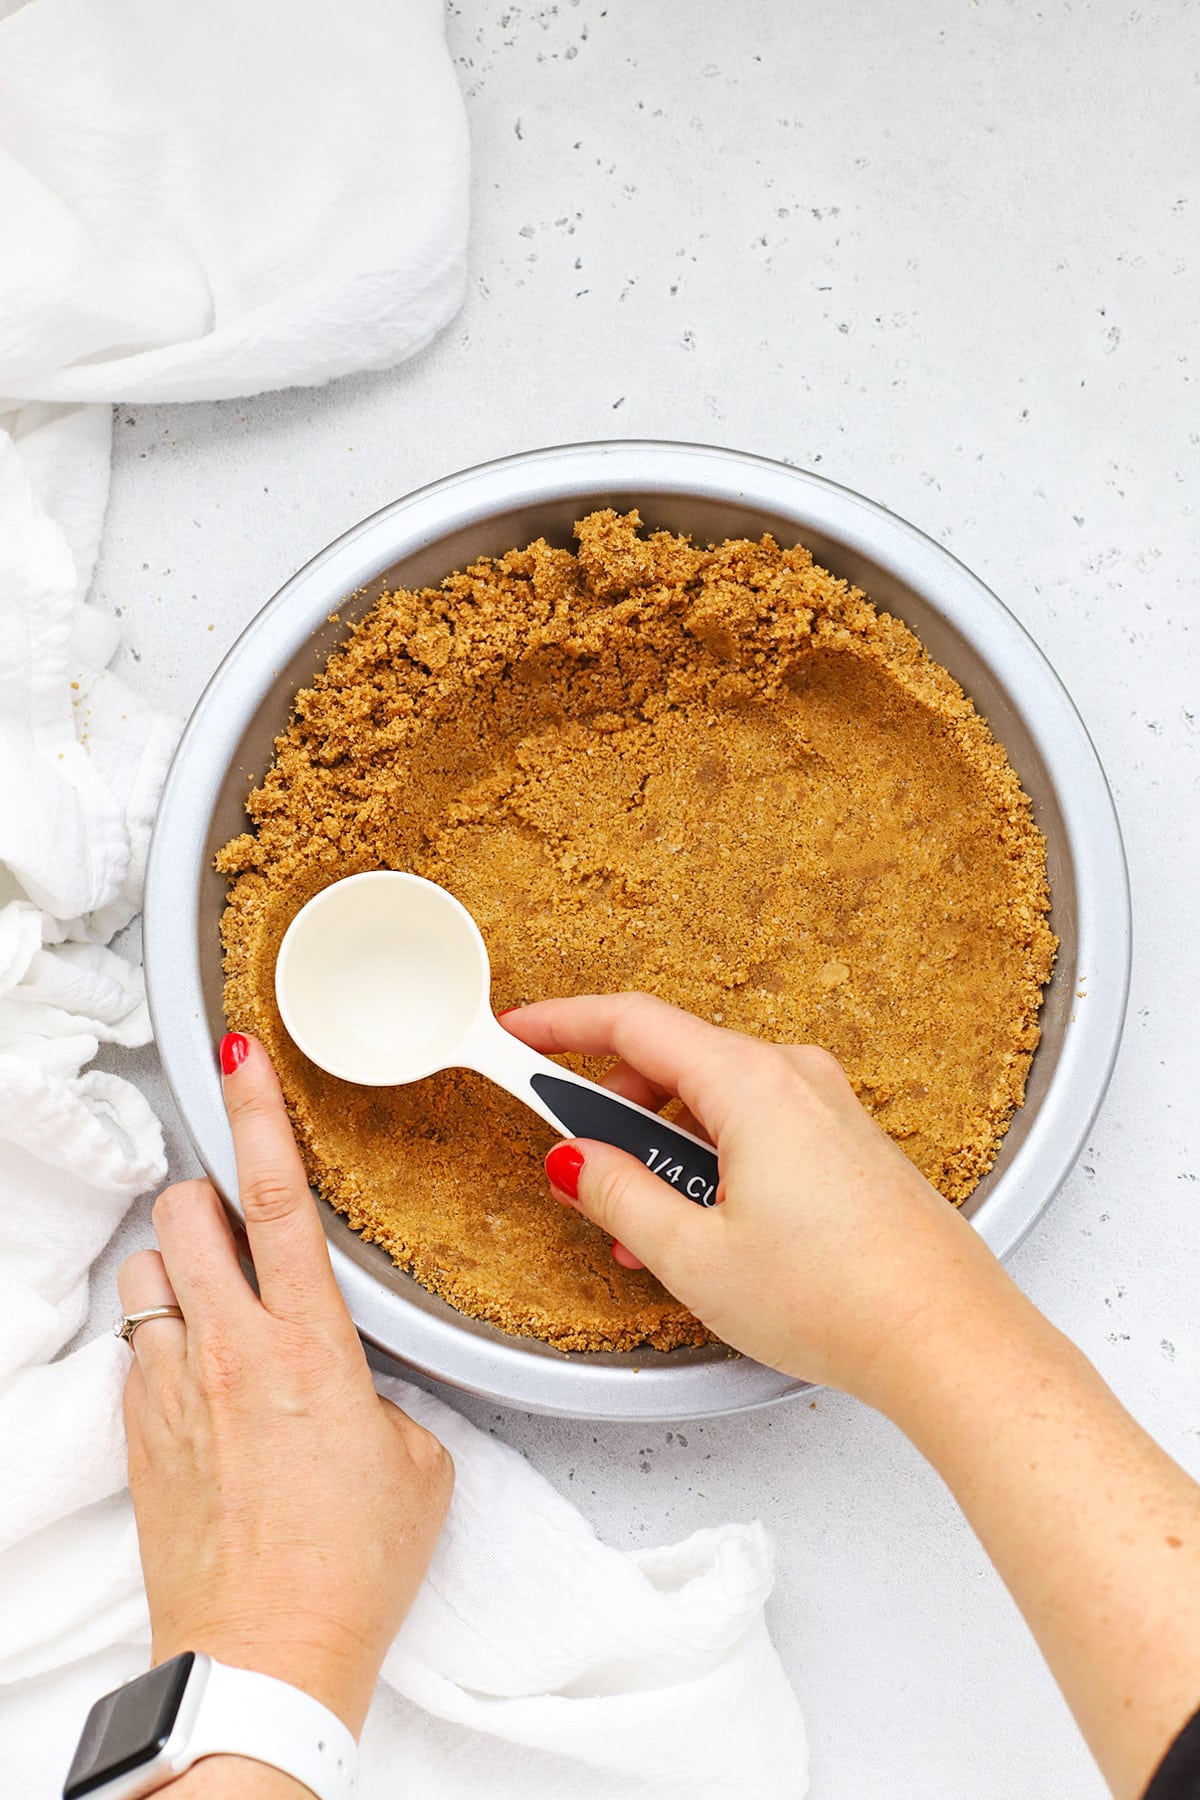 Patting out a gluten-free graham cracker crust into a metal pie pan